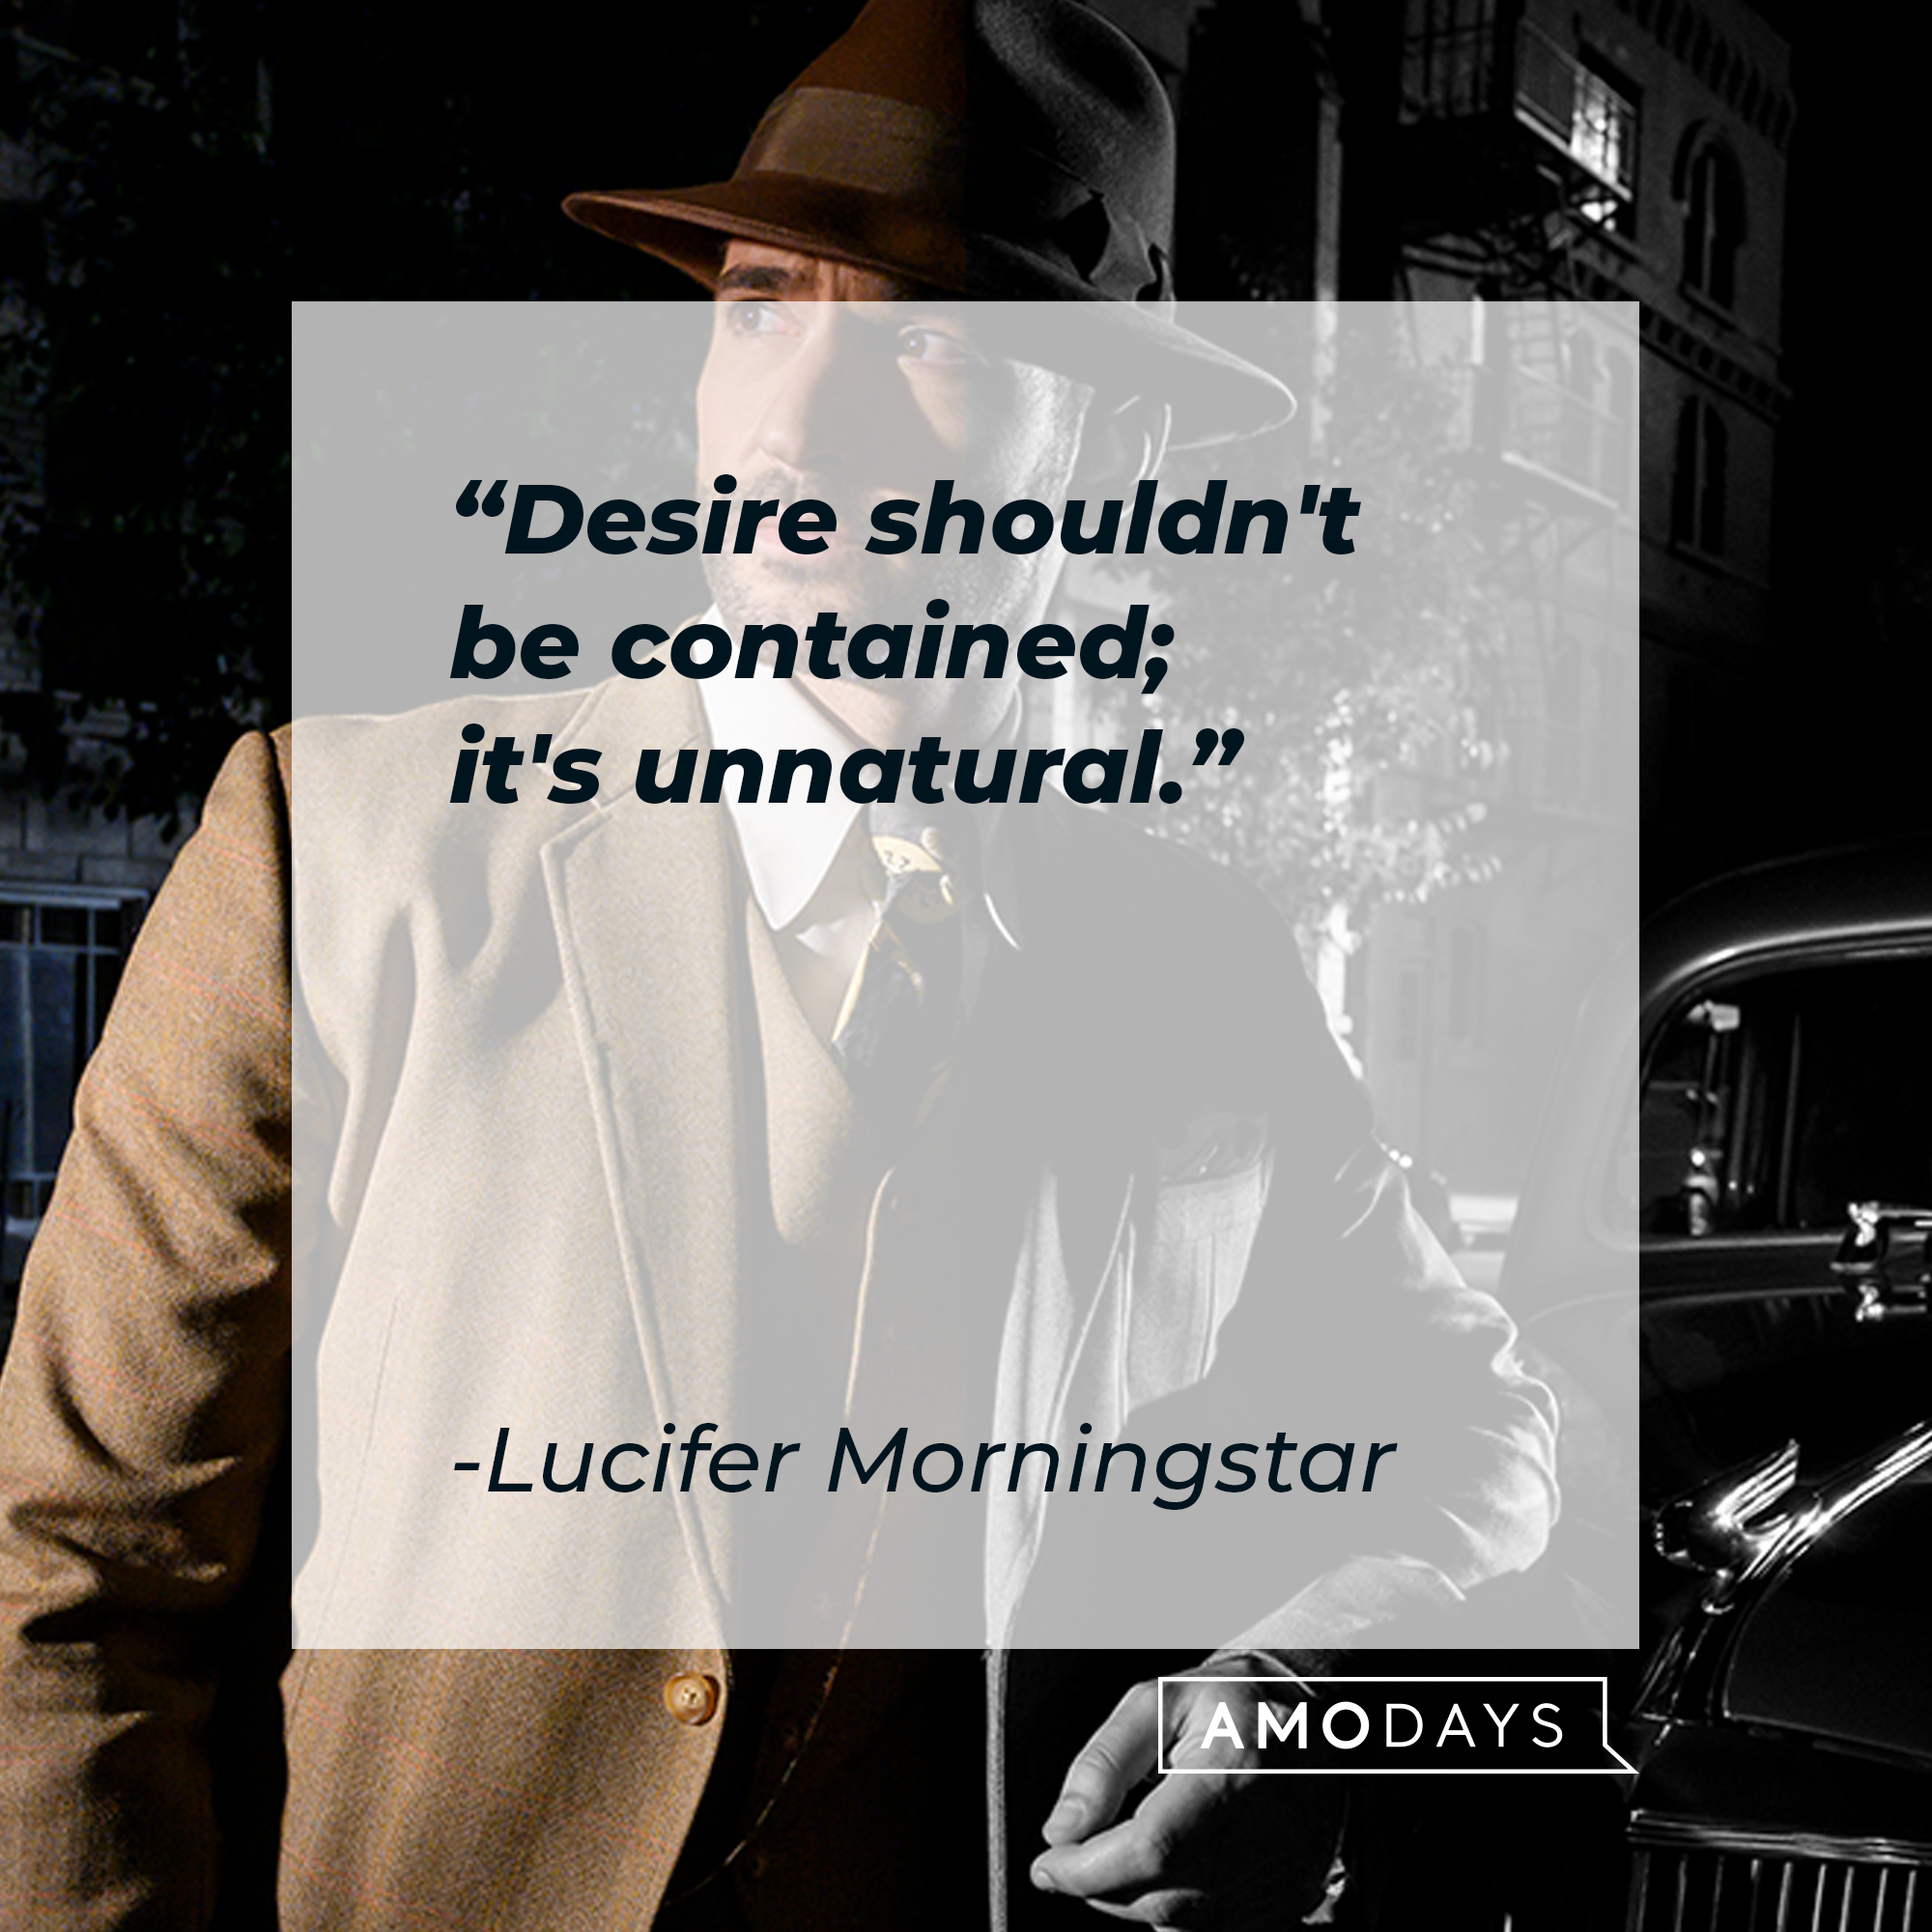 Lucifer Morningstar’s quote: "Desire shouldn't be contained; it's unnatural." | Source: Facebook.com/LuciferNetflix